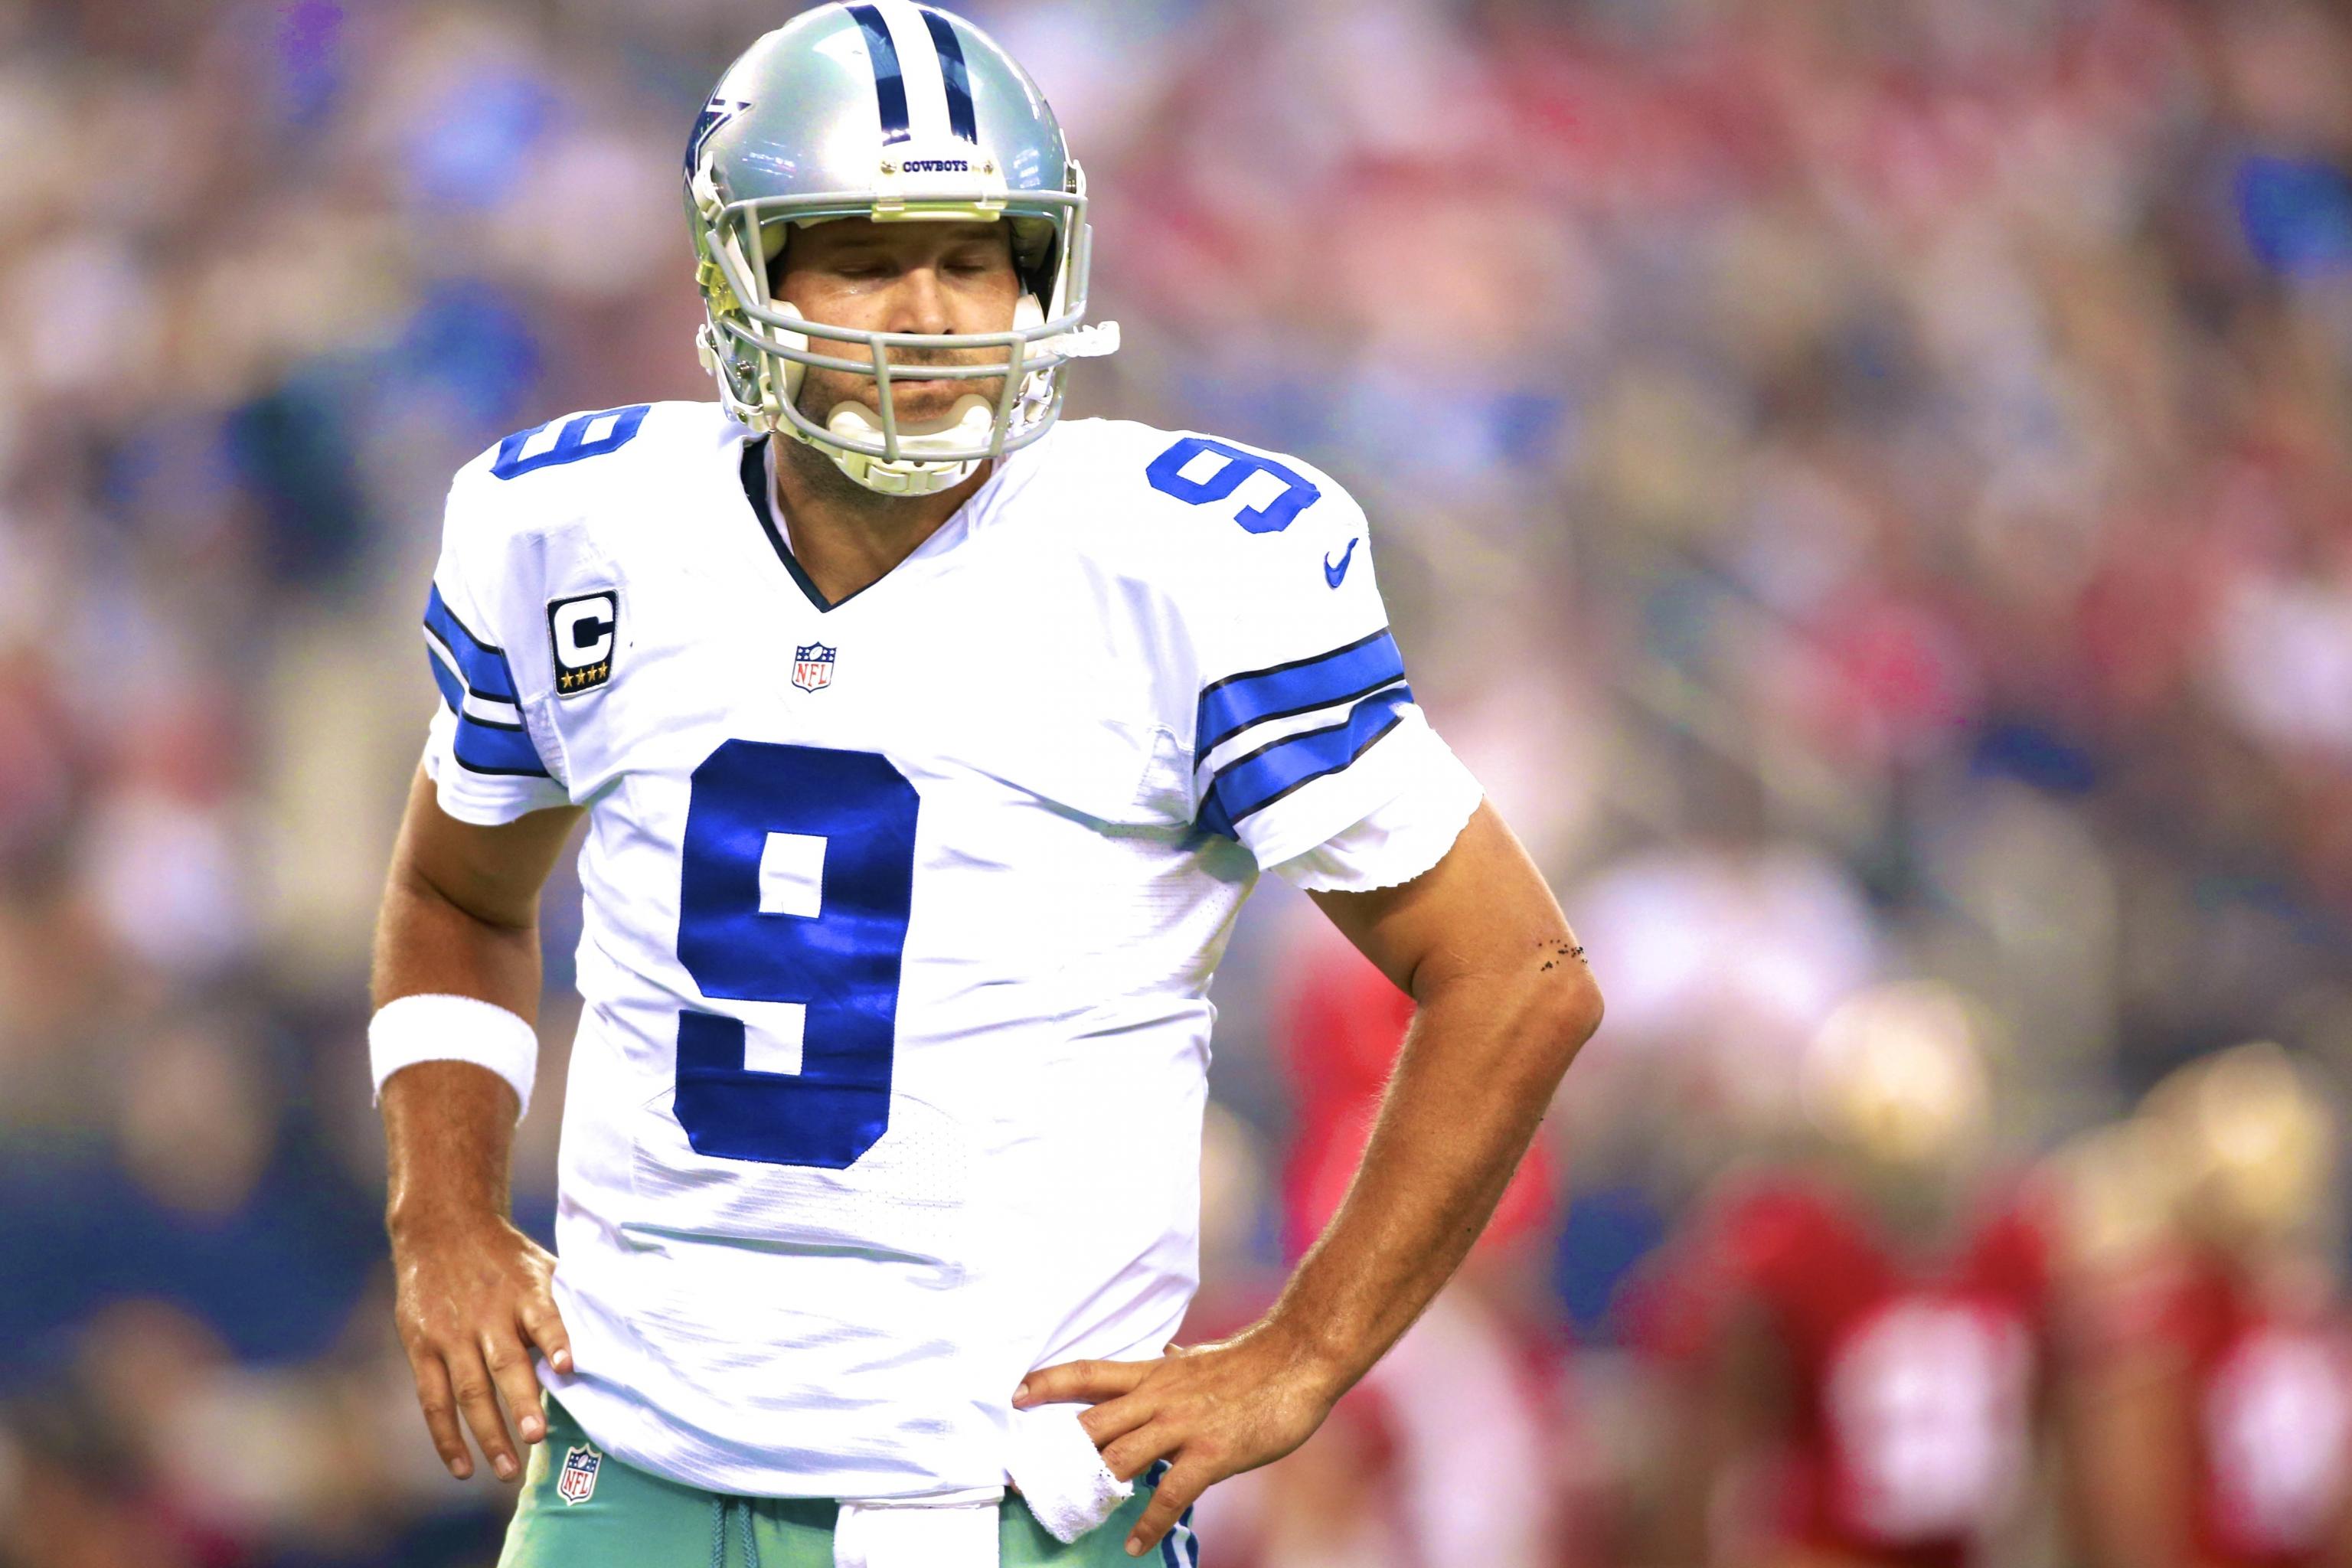 Tony Romo: From the Small Town to the Big Stage